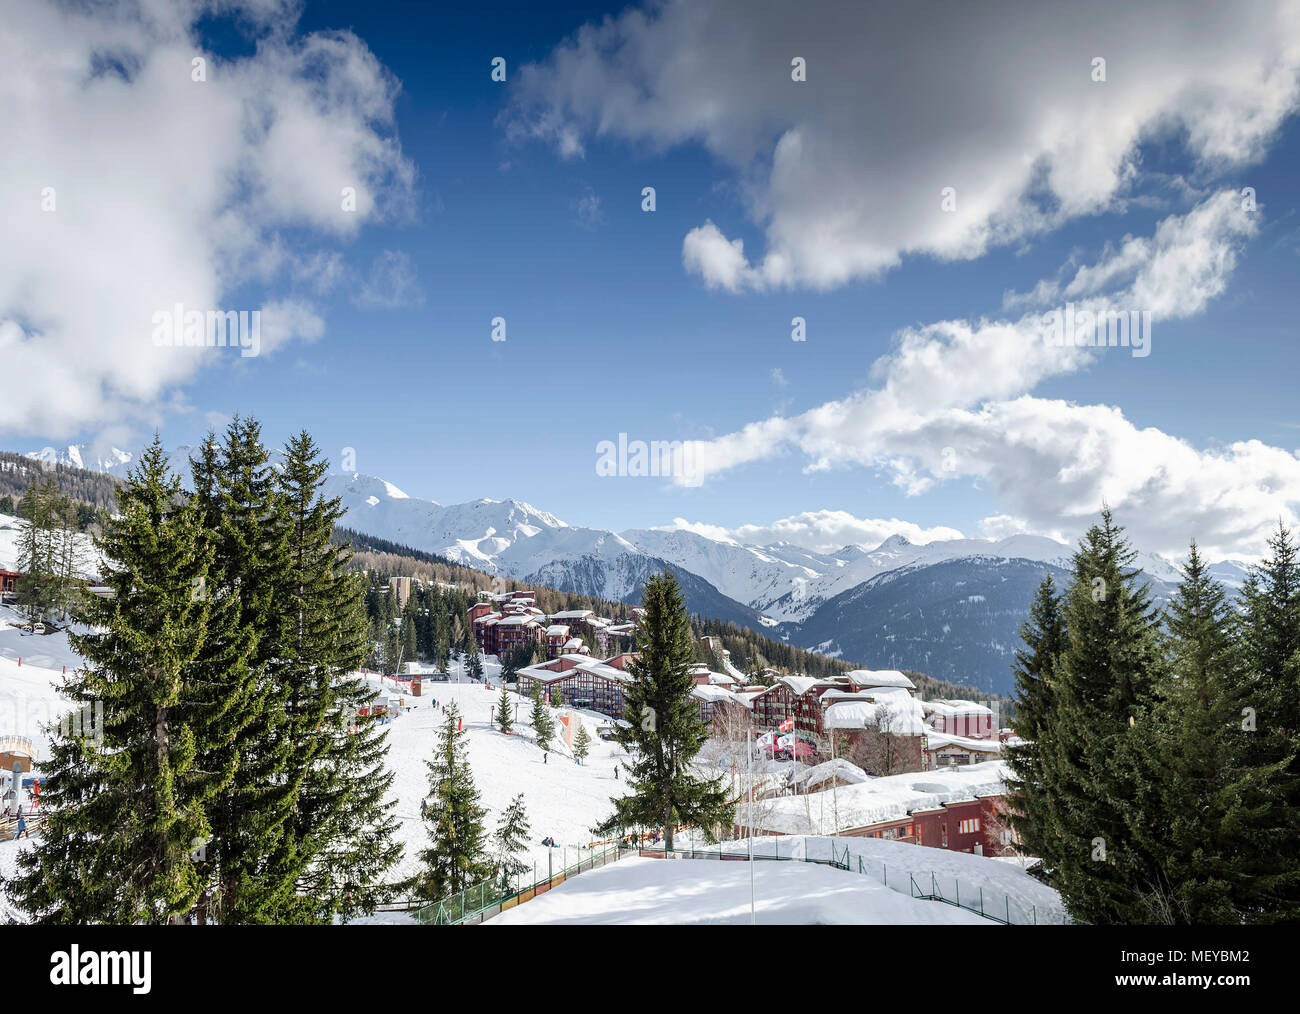 Les Arcs Buildings High Resolution Stock Photography and Images - Alamy